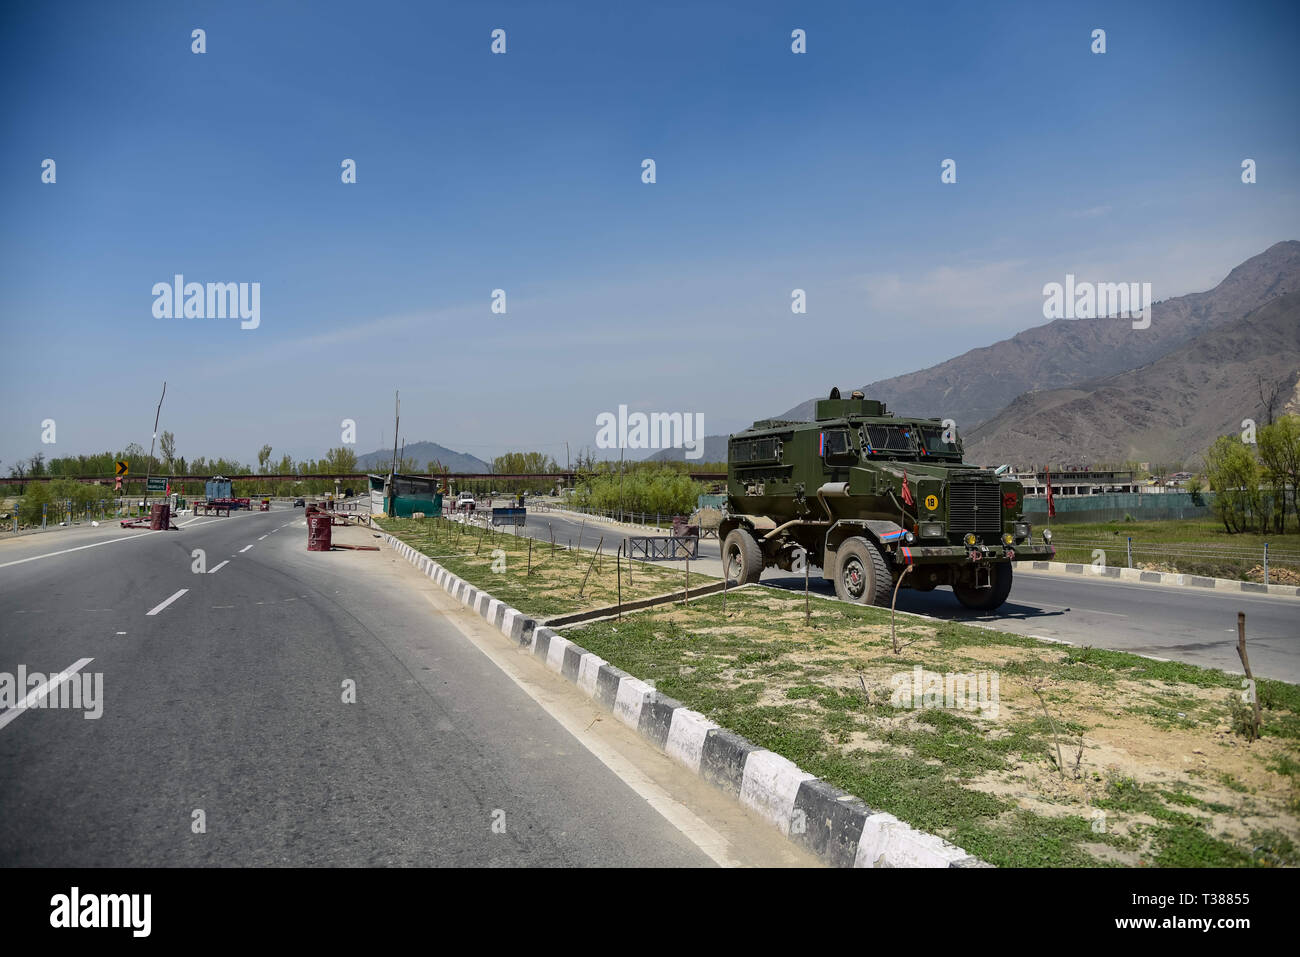 Srinagar, Kashmir. 7th Apr, 2019. An Indian armoured vehicle seen parked on standby at the National Highway on the outskirts of Srinagar.The Indian authorities on Wednesday April 3, banned civilian traffic movement on the Jammu-Srinagar highway on Sundays and Wednesdays from 4 a.m. to 5 p.m. to ensure the safety of the Indian security convoys following a suicide attack on Indian army convoy in Pulwama on Thursday, February 14 which killed 50 Indian Army men. Credit: Idrees Abbas/SOPA Images/ZUMA Wire/Alamy Live News Stock Photo